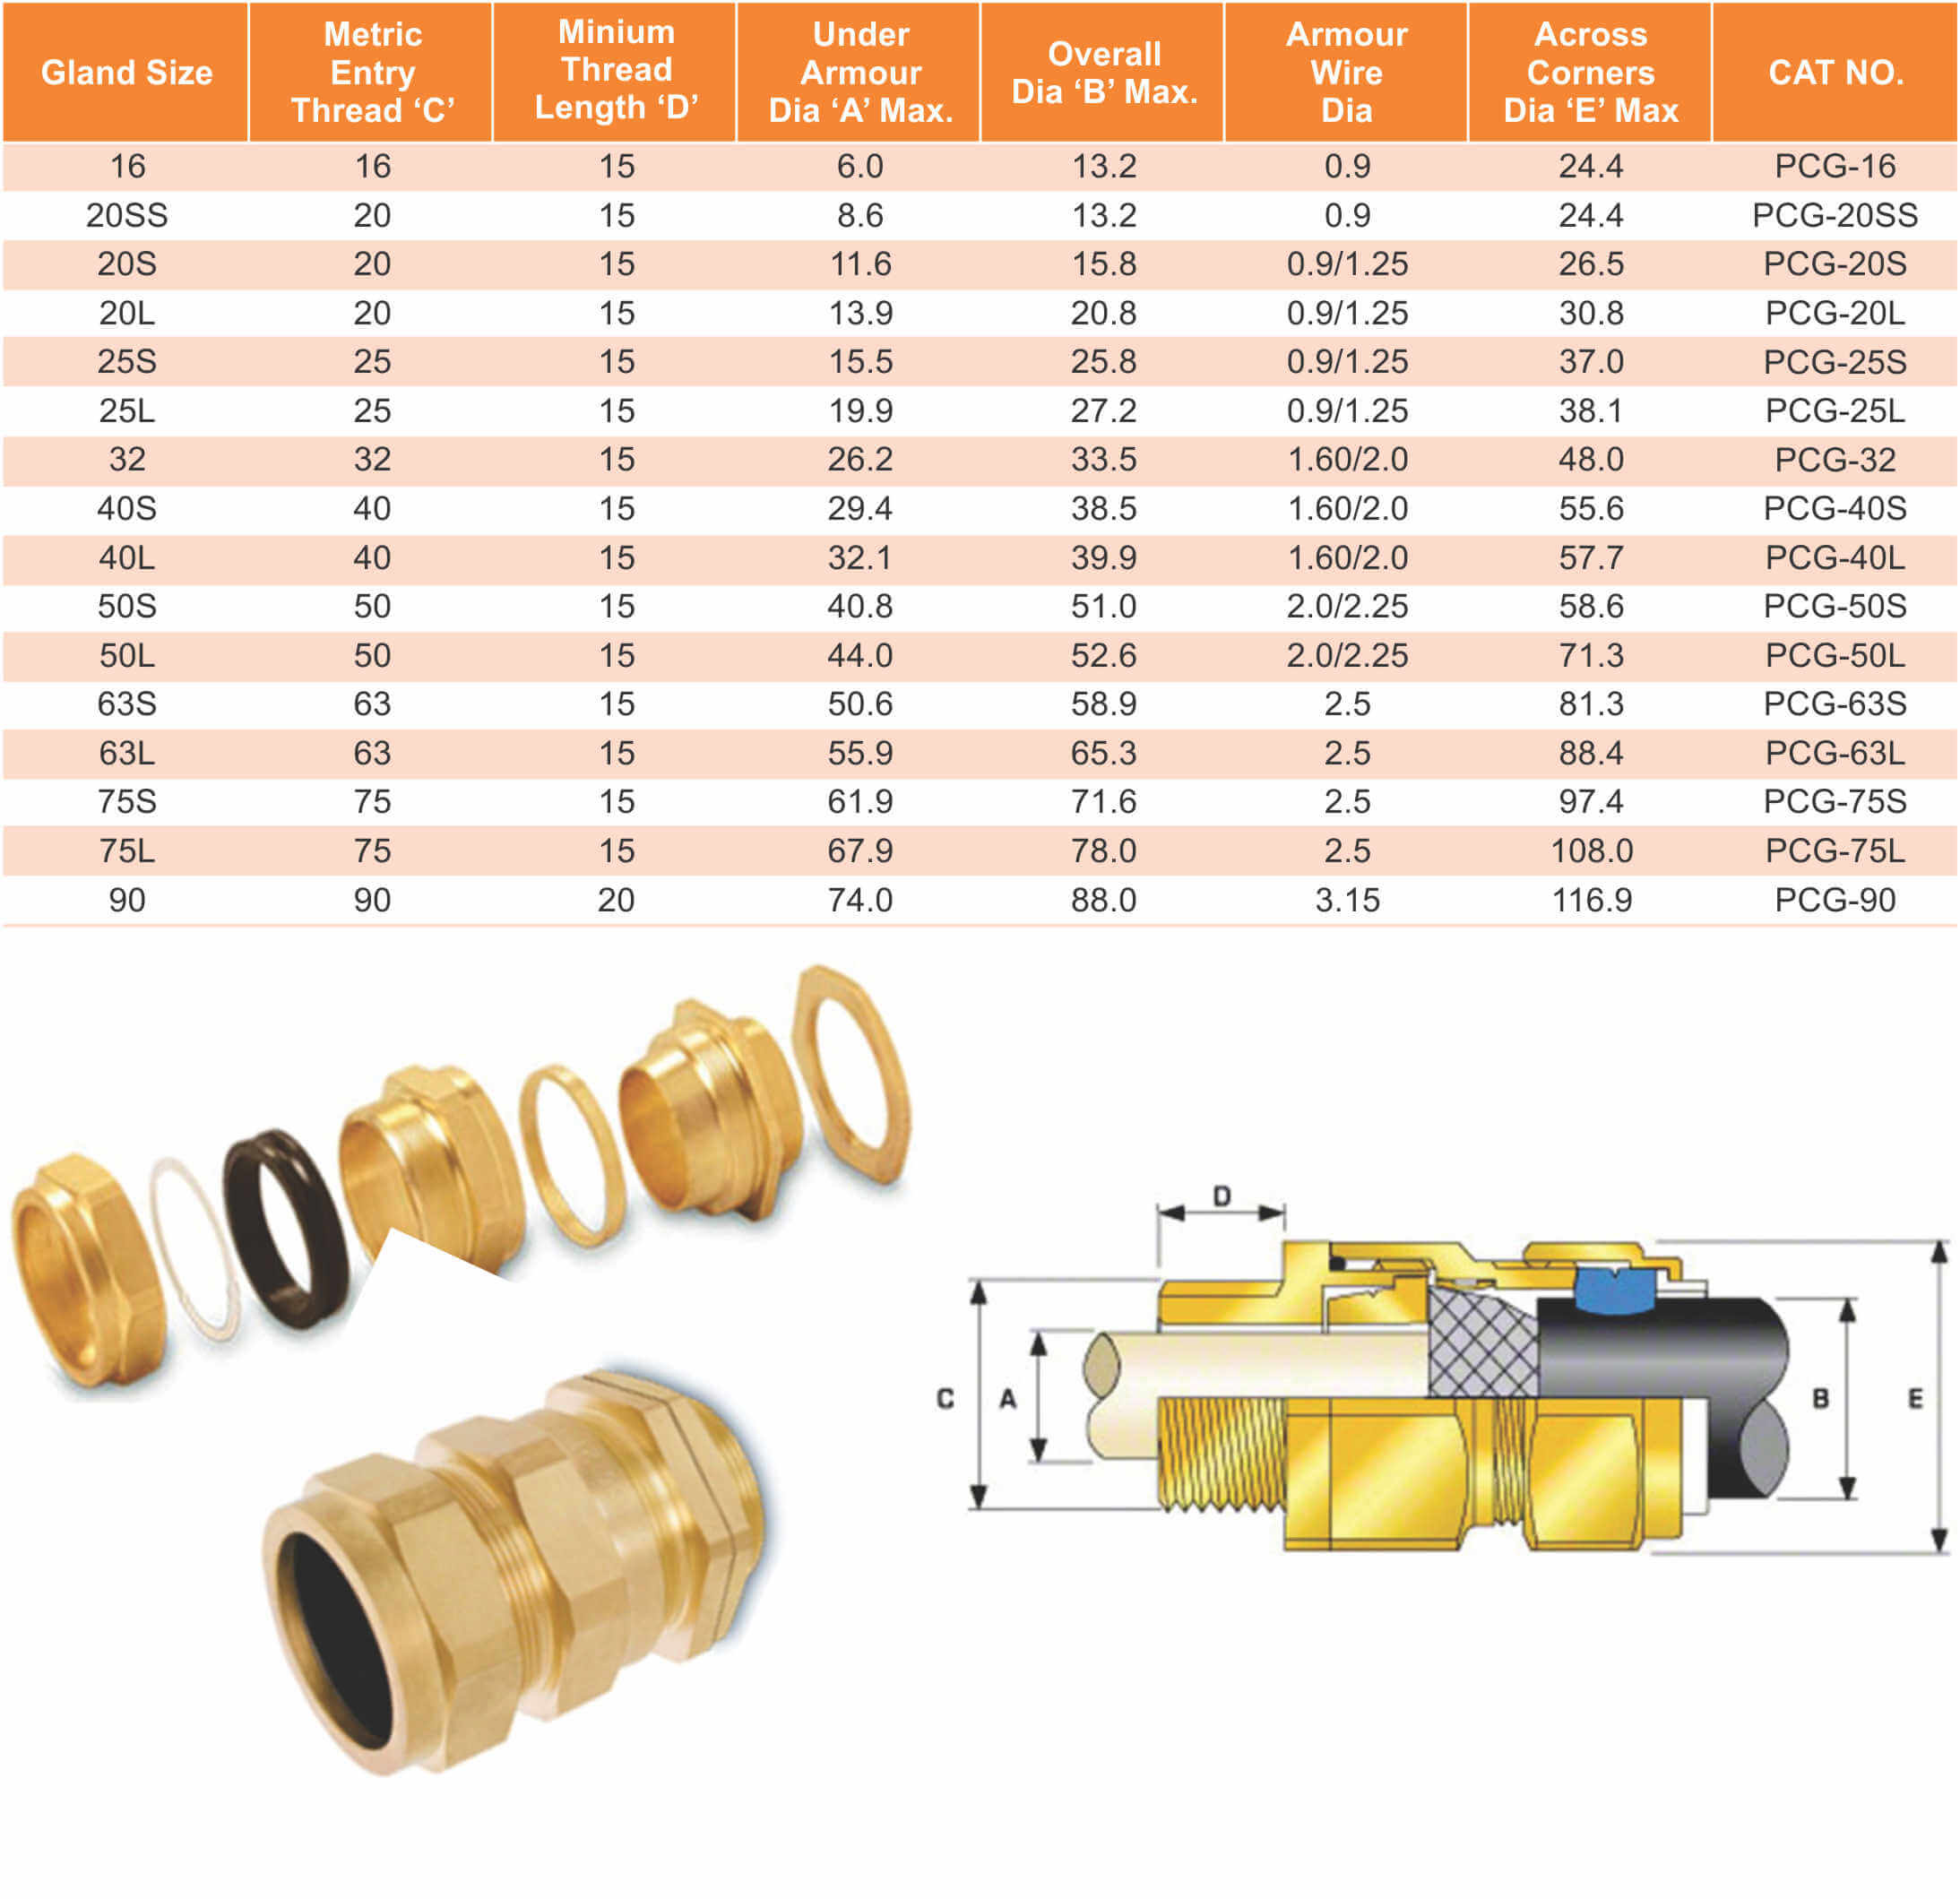 Cable gland chart sizes with Cable gland Images